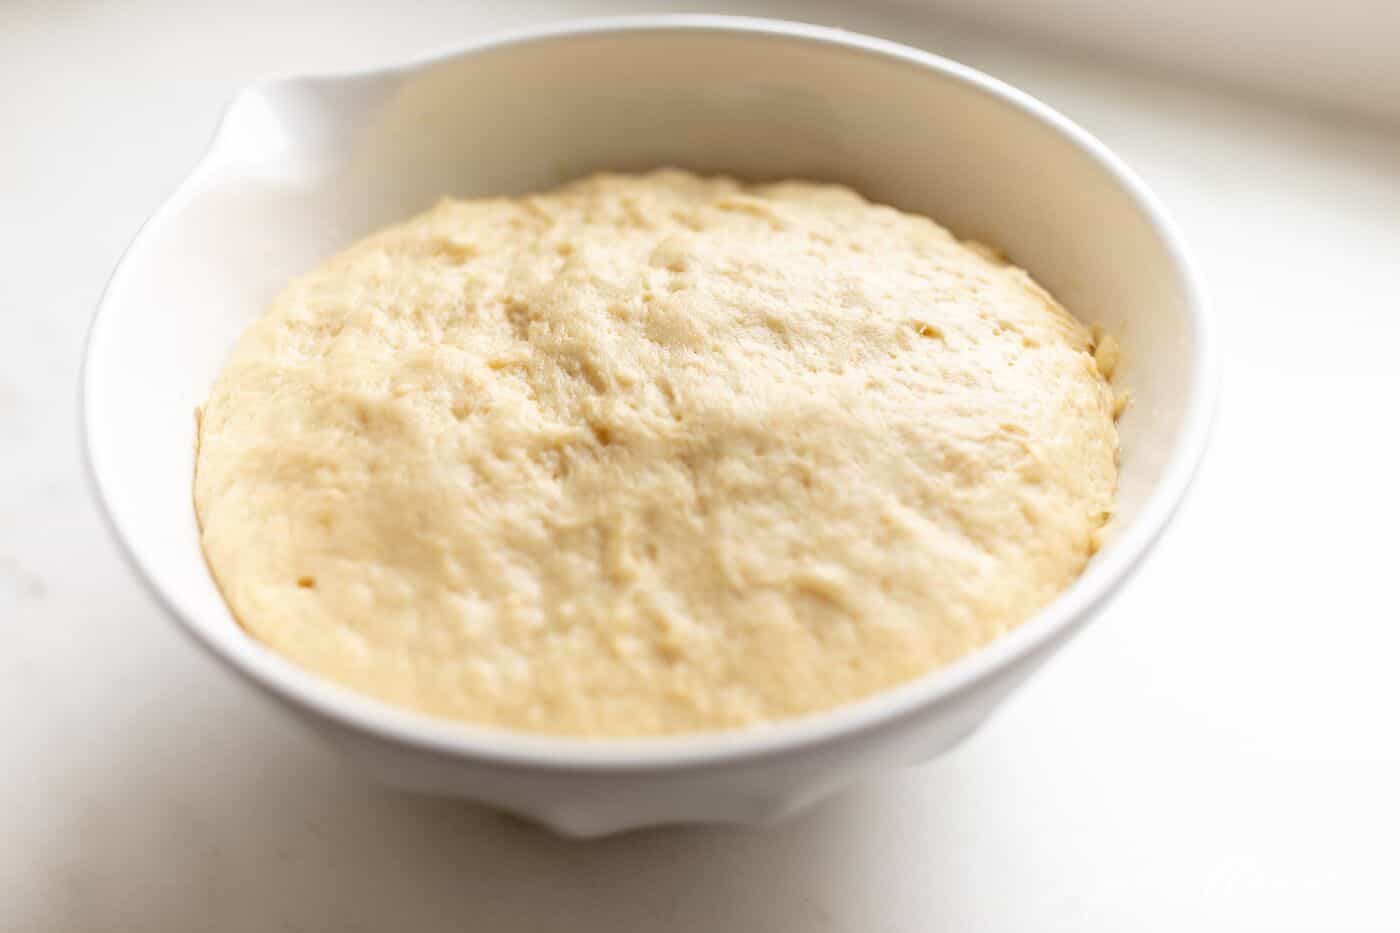 A white bowl filled with dough made with yeast.